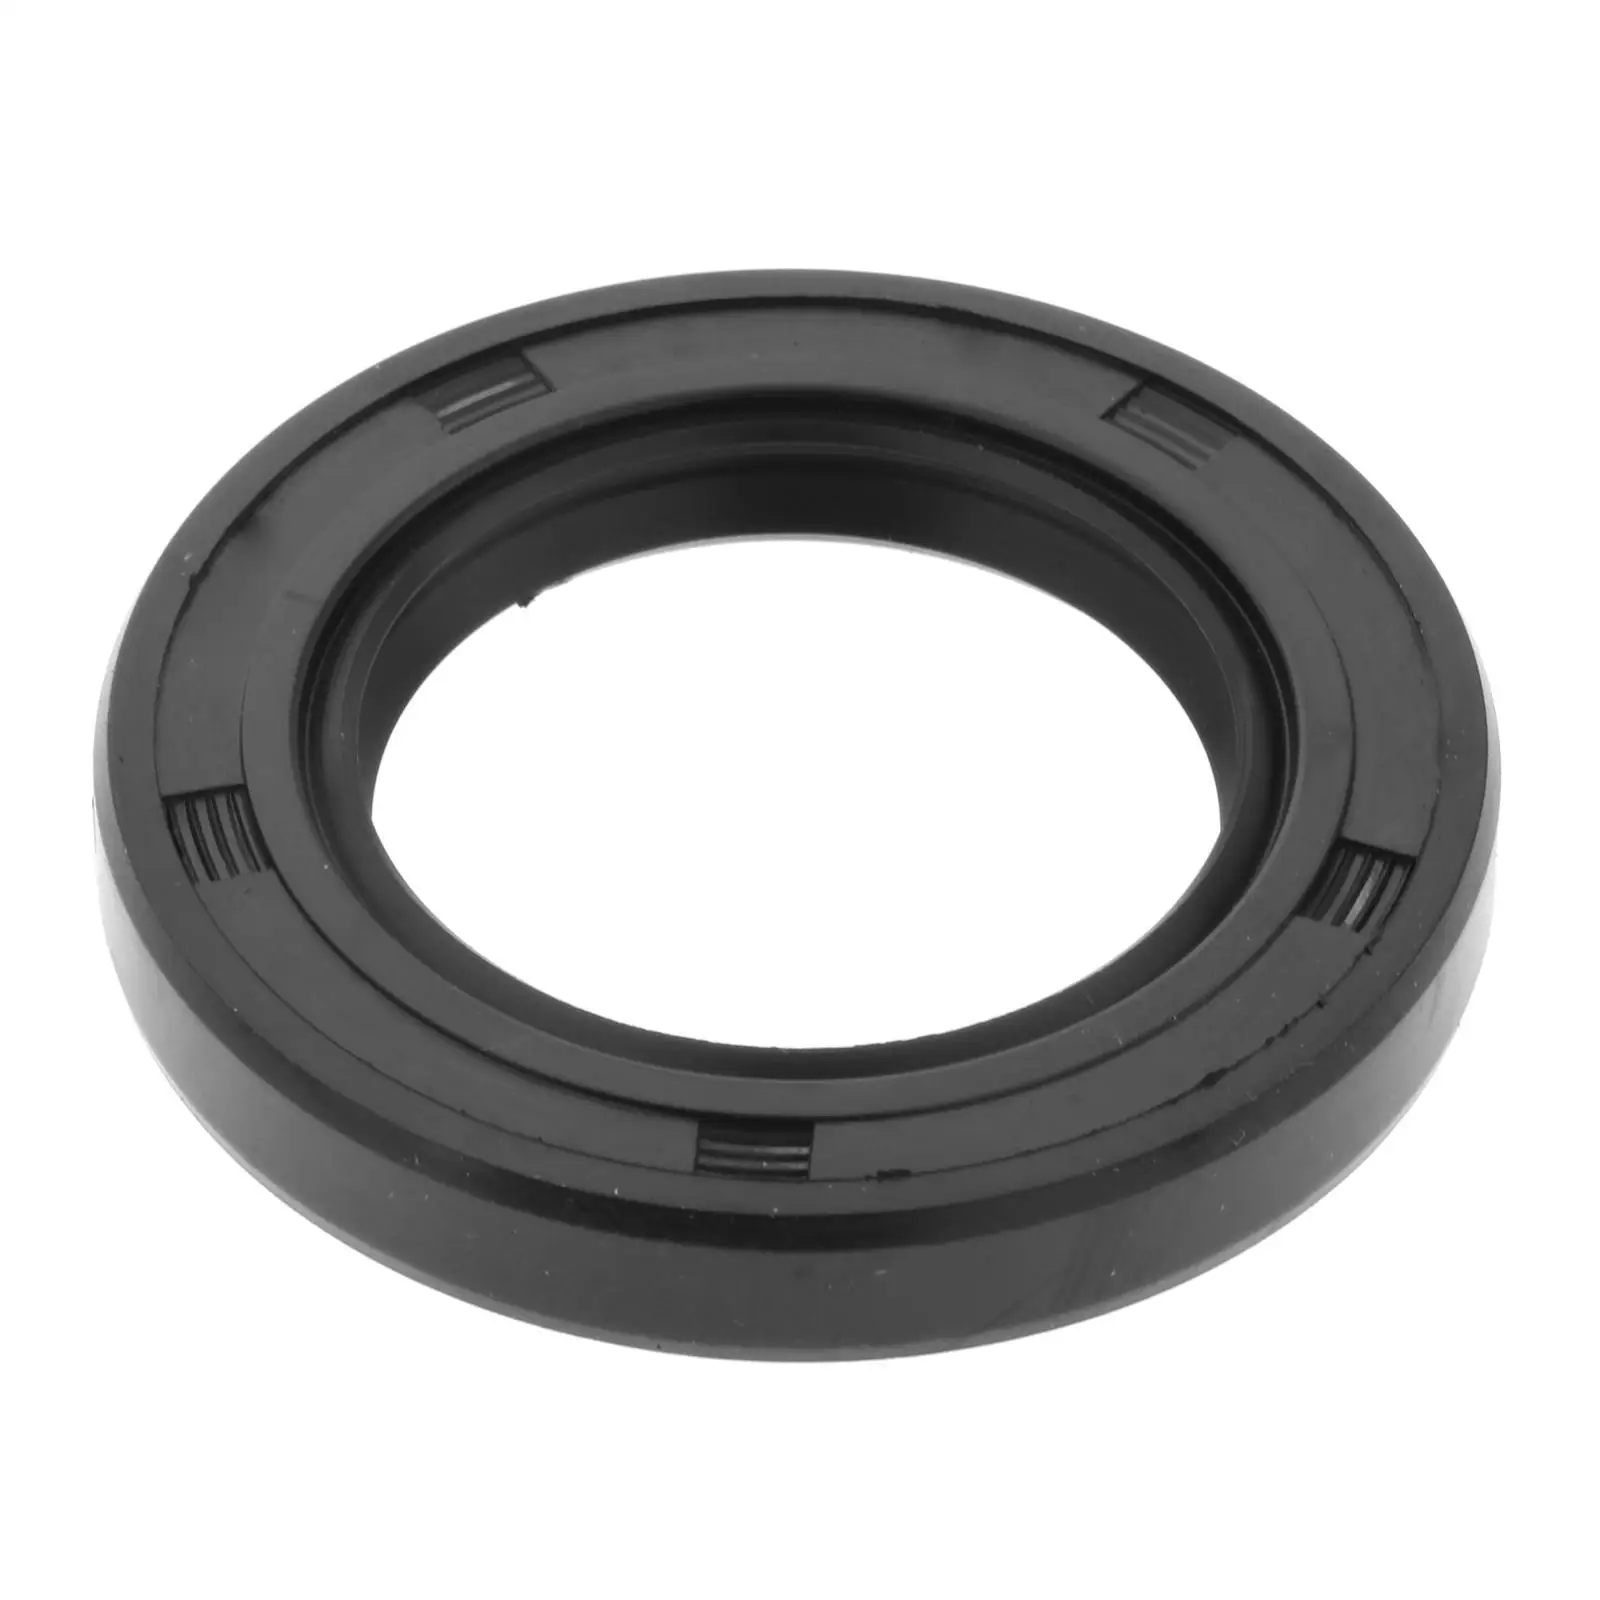 Oil Seal Fits for Yamaha Outboard Motor 2T 60HP-90HP Accessory Replacement